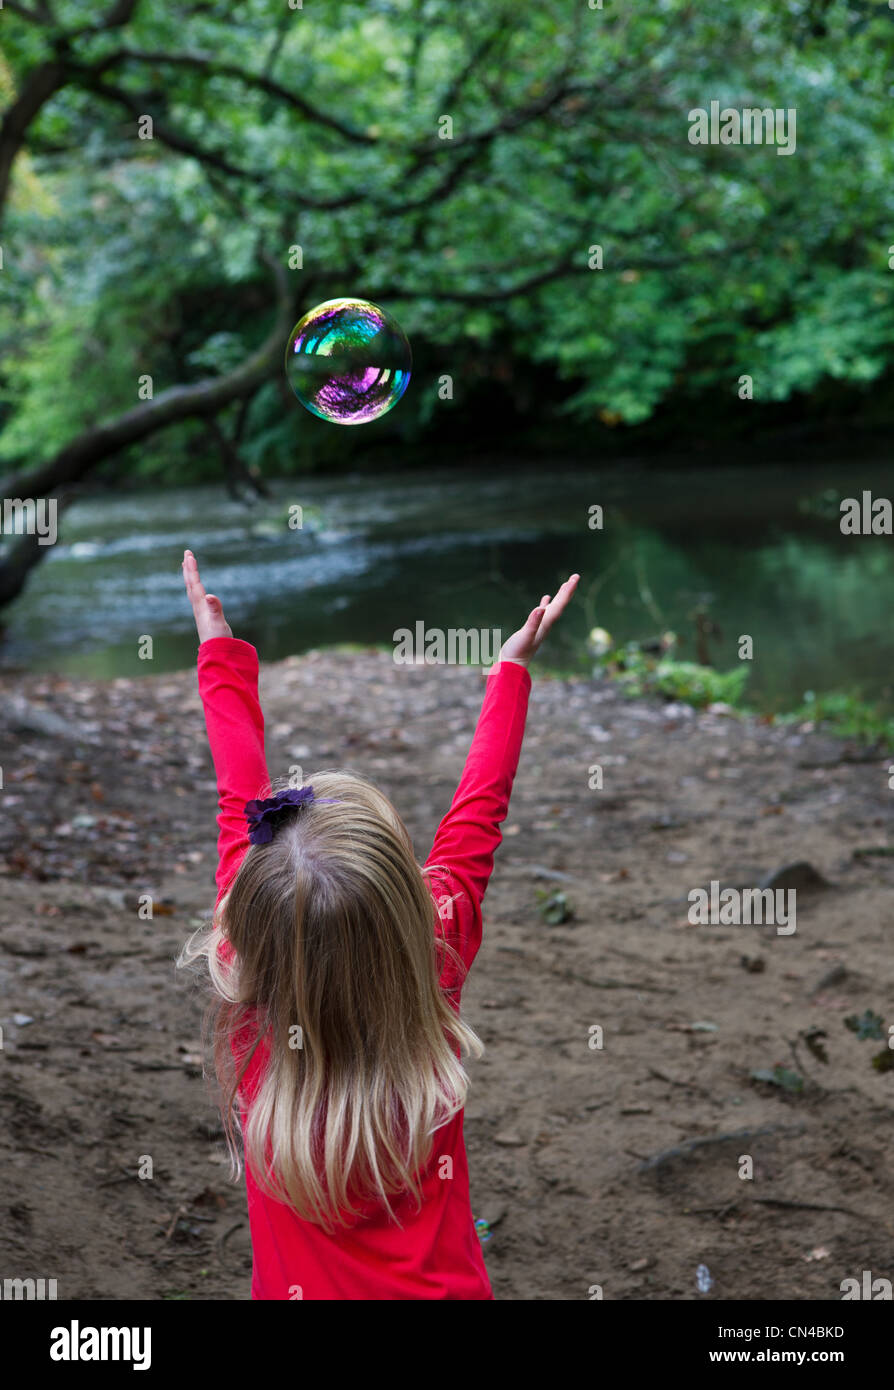 Girl reaching to catch a bubble in a woodland setting Stock Photo